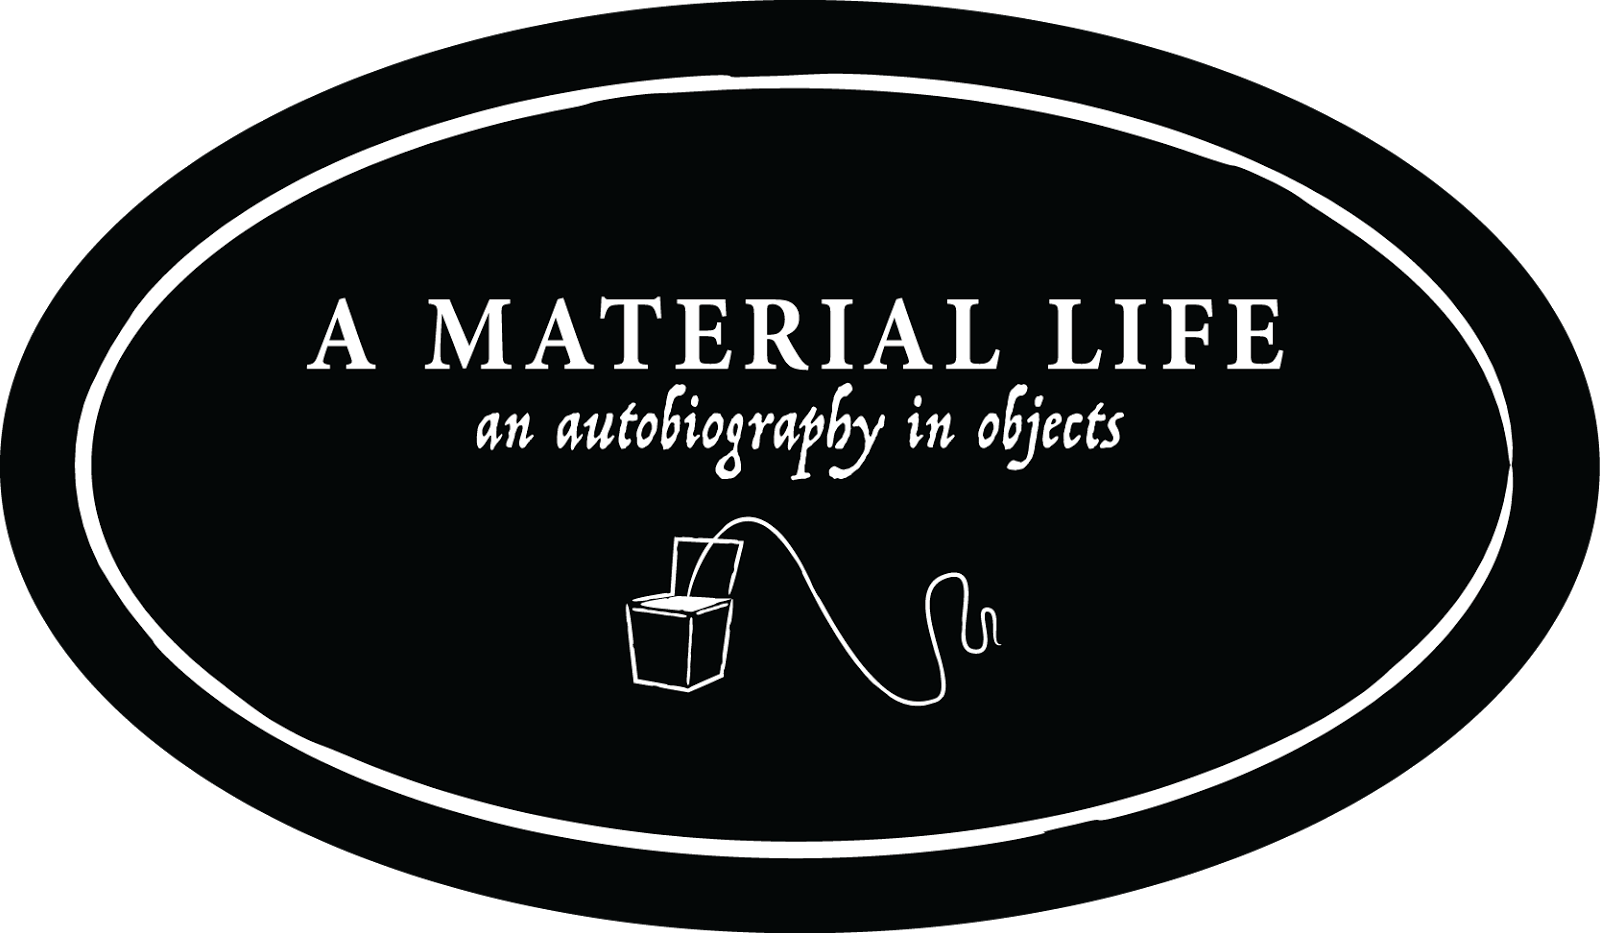 A Material Life: An Autobiography in Objects